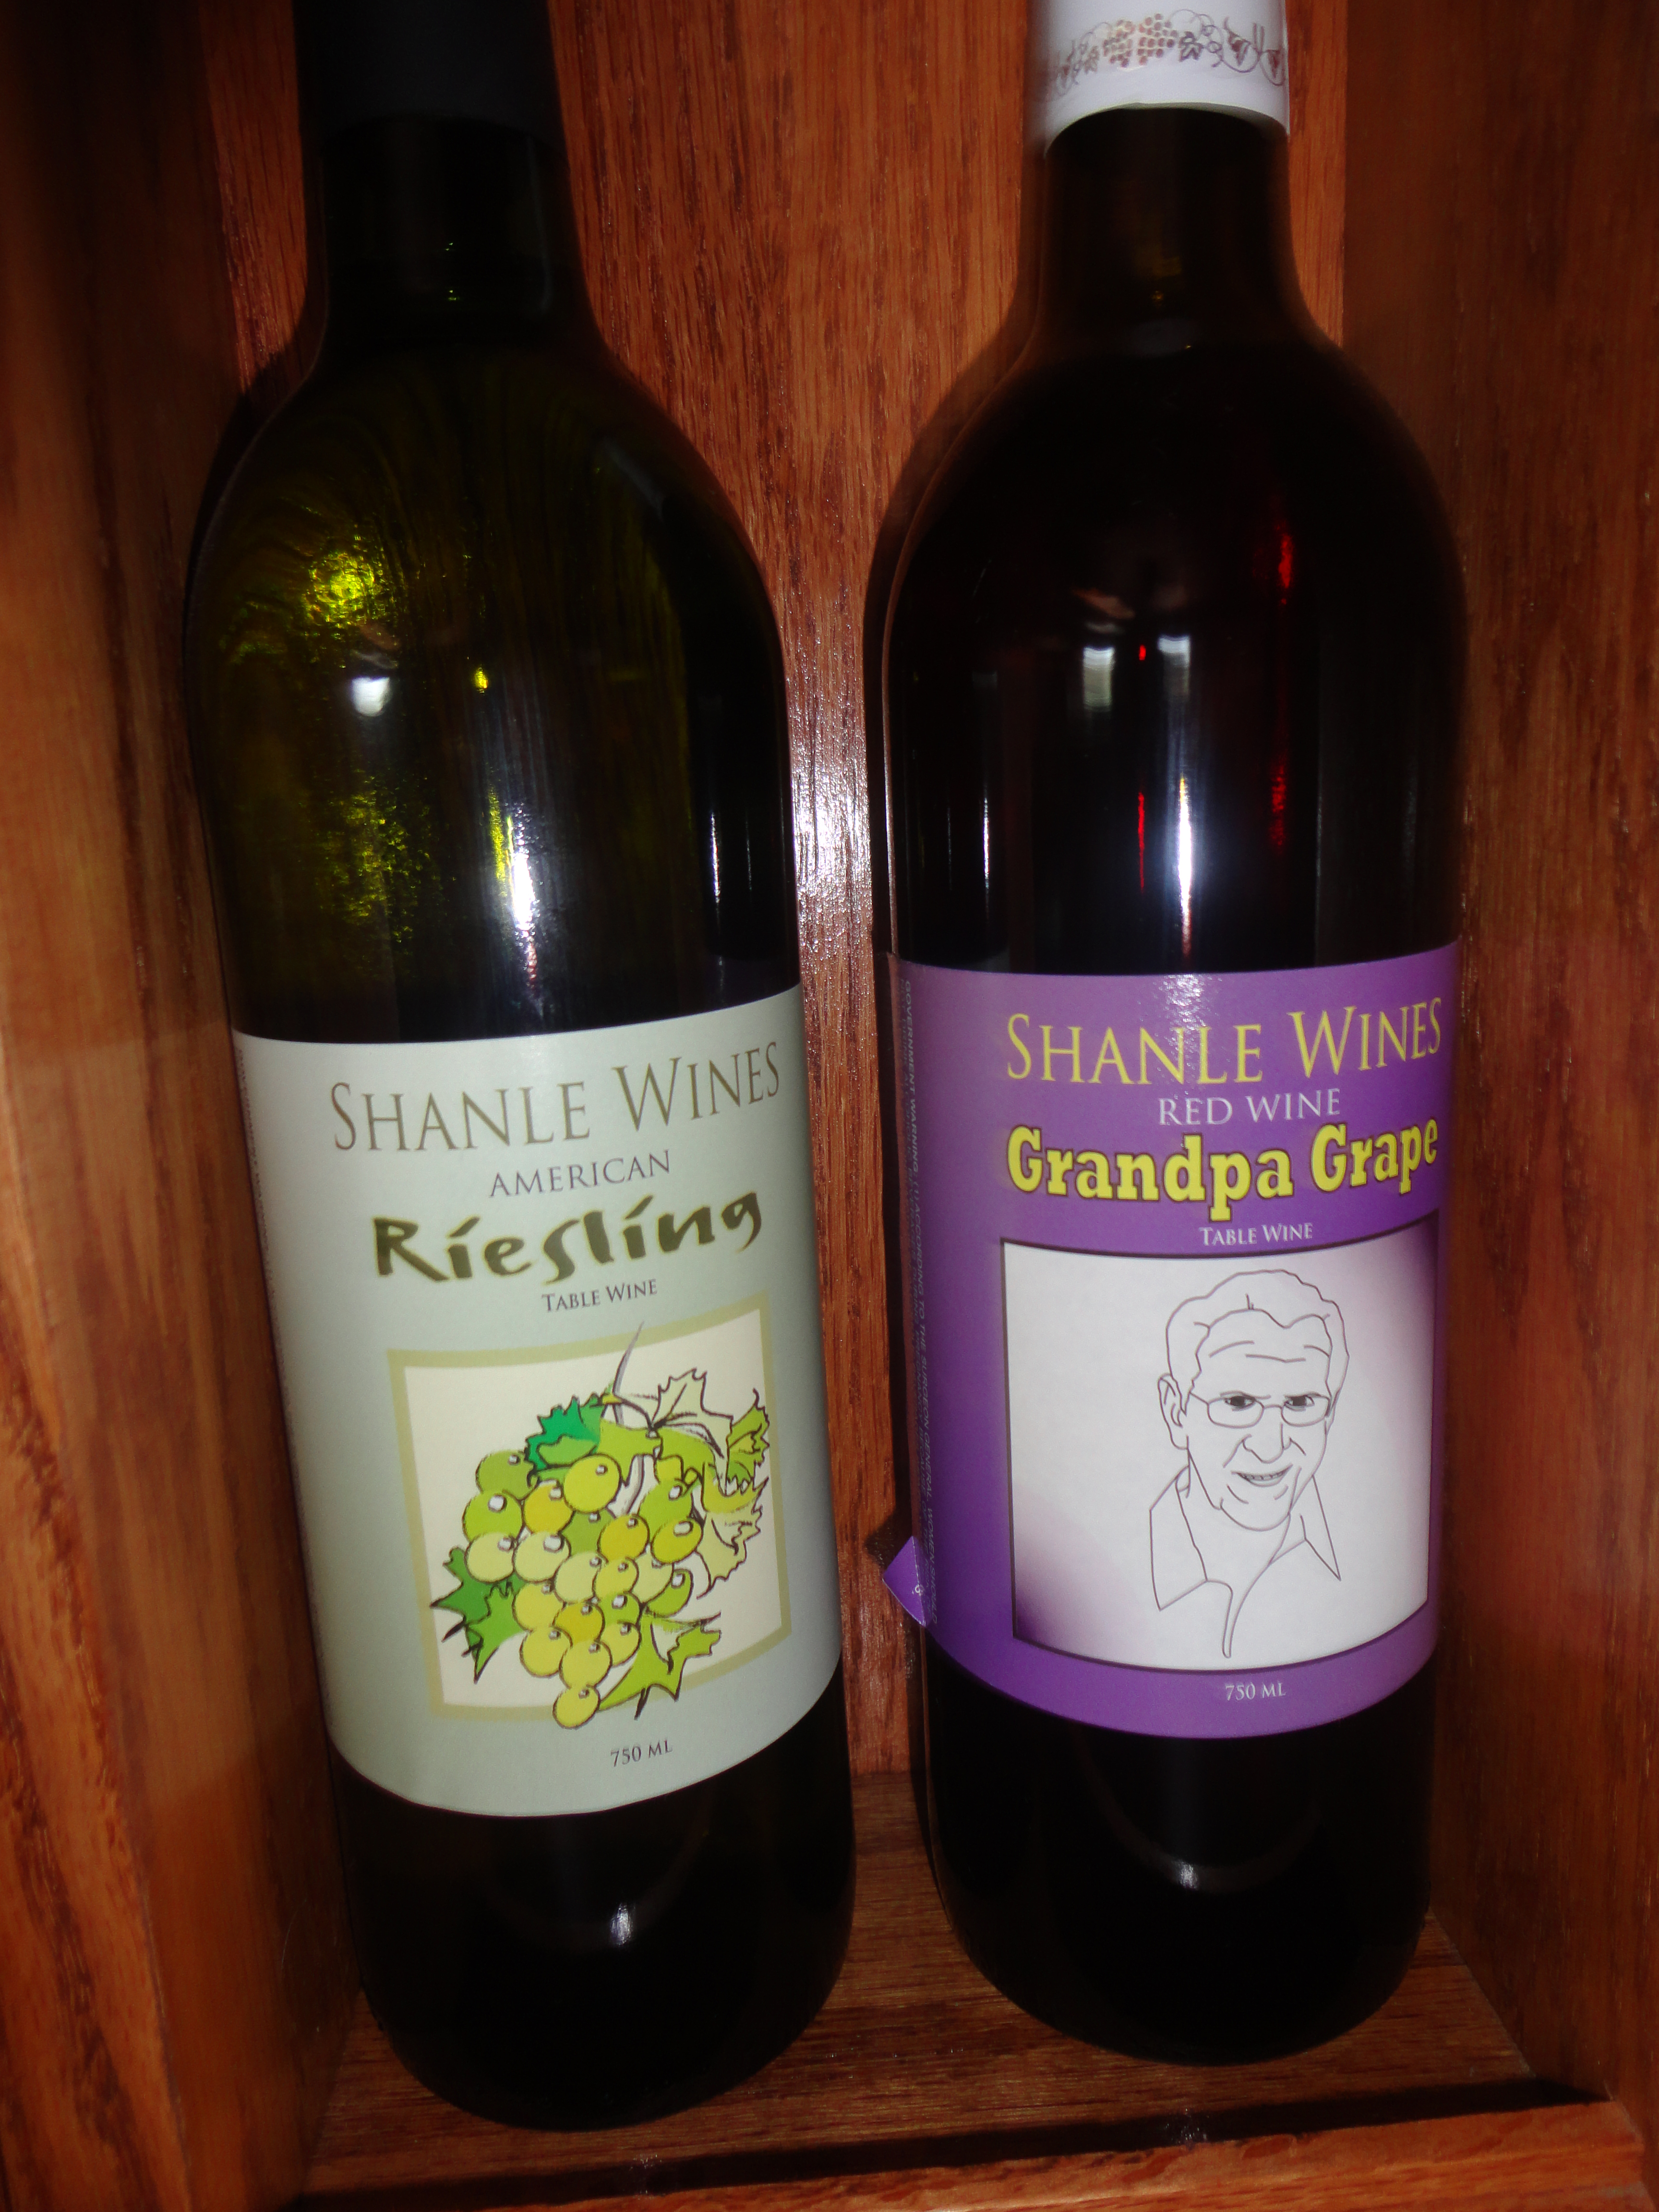 Wines offered by the Walnut Street Winery